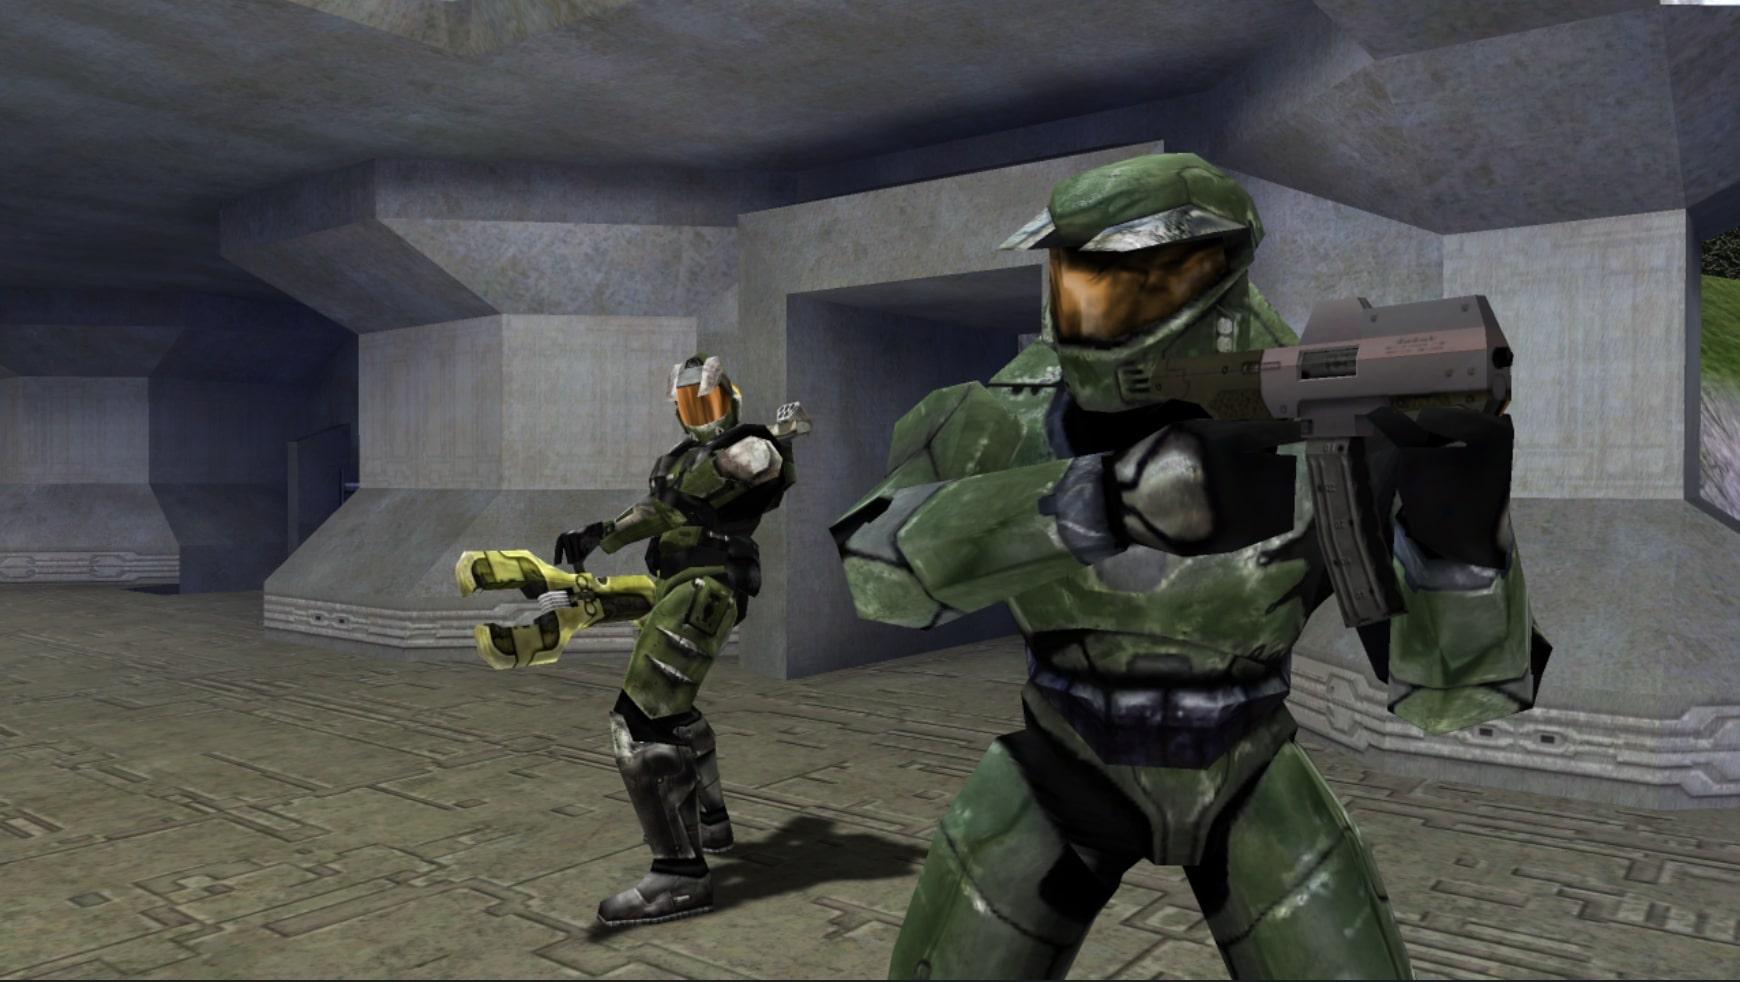 Halo: Combat Evolved devs almost scrapped one of the series' most iconic  vehicles